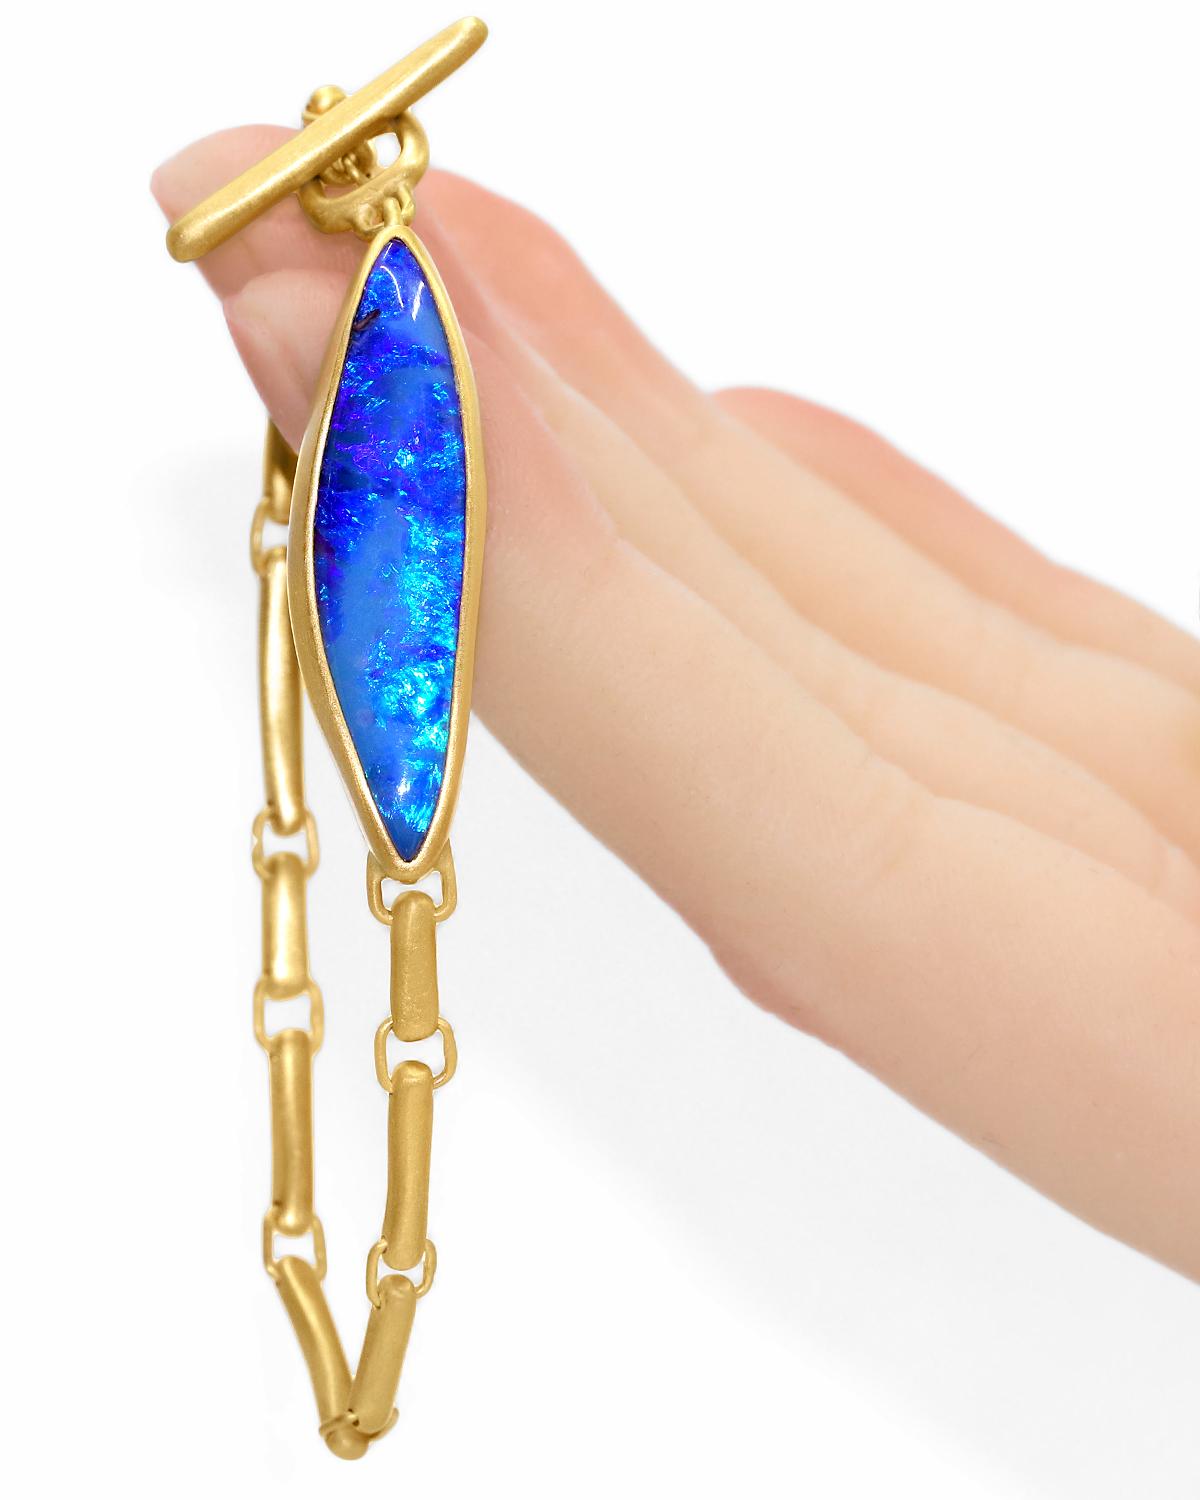 One of a Kind ID Bracelet by jewelry maker Lola Brooks hand-fabricated in matte-finished 22k yellow gold showcasing a phenomenal 11.75 carat deep blue solid Australian Boulder Opal with fantastic neon green, neon blue, and violet color play, set in